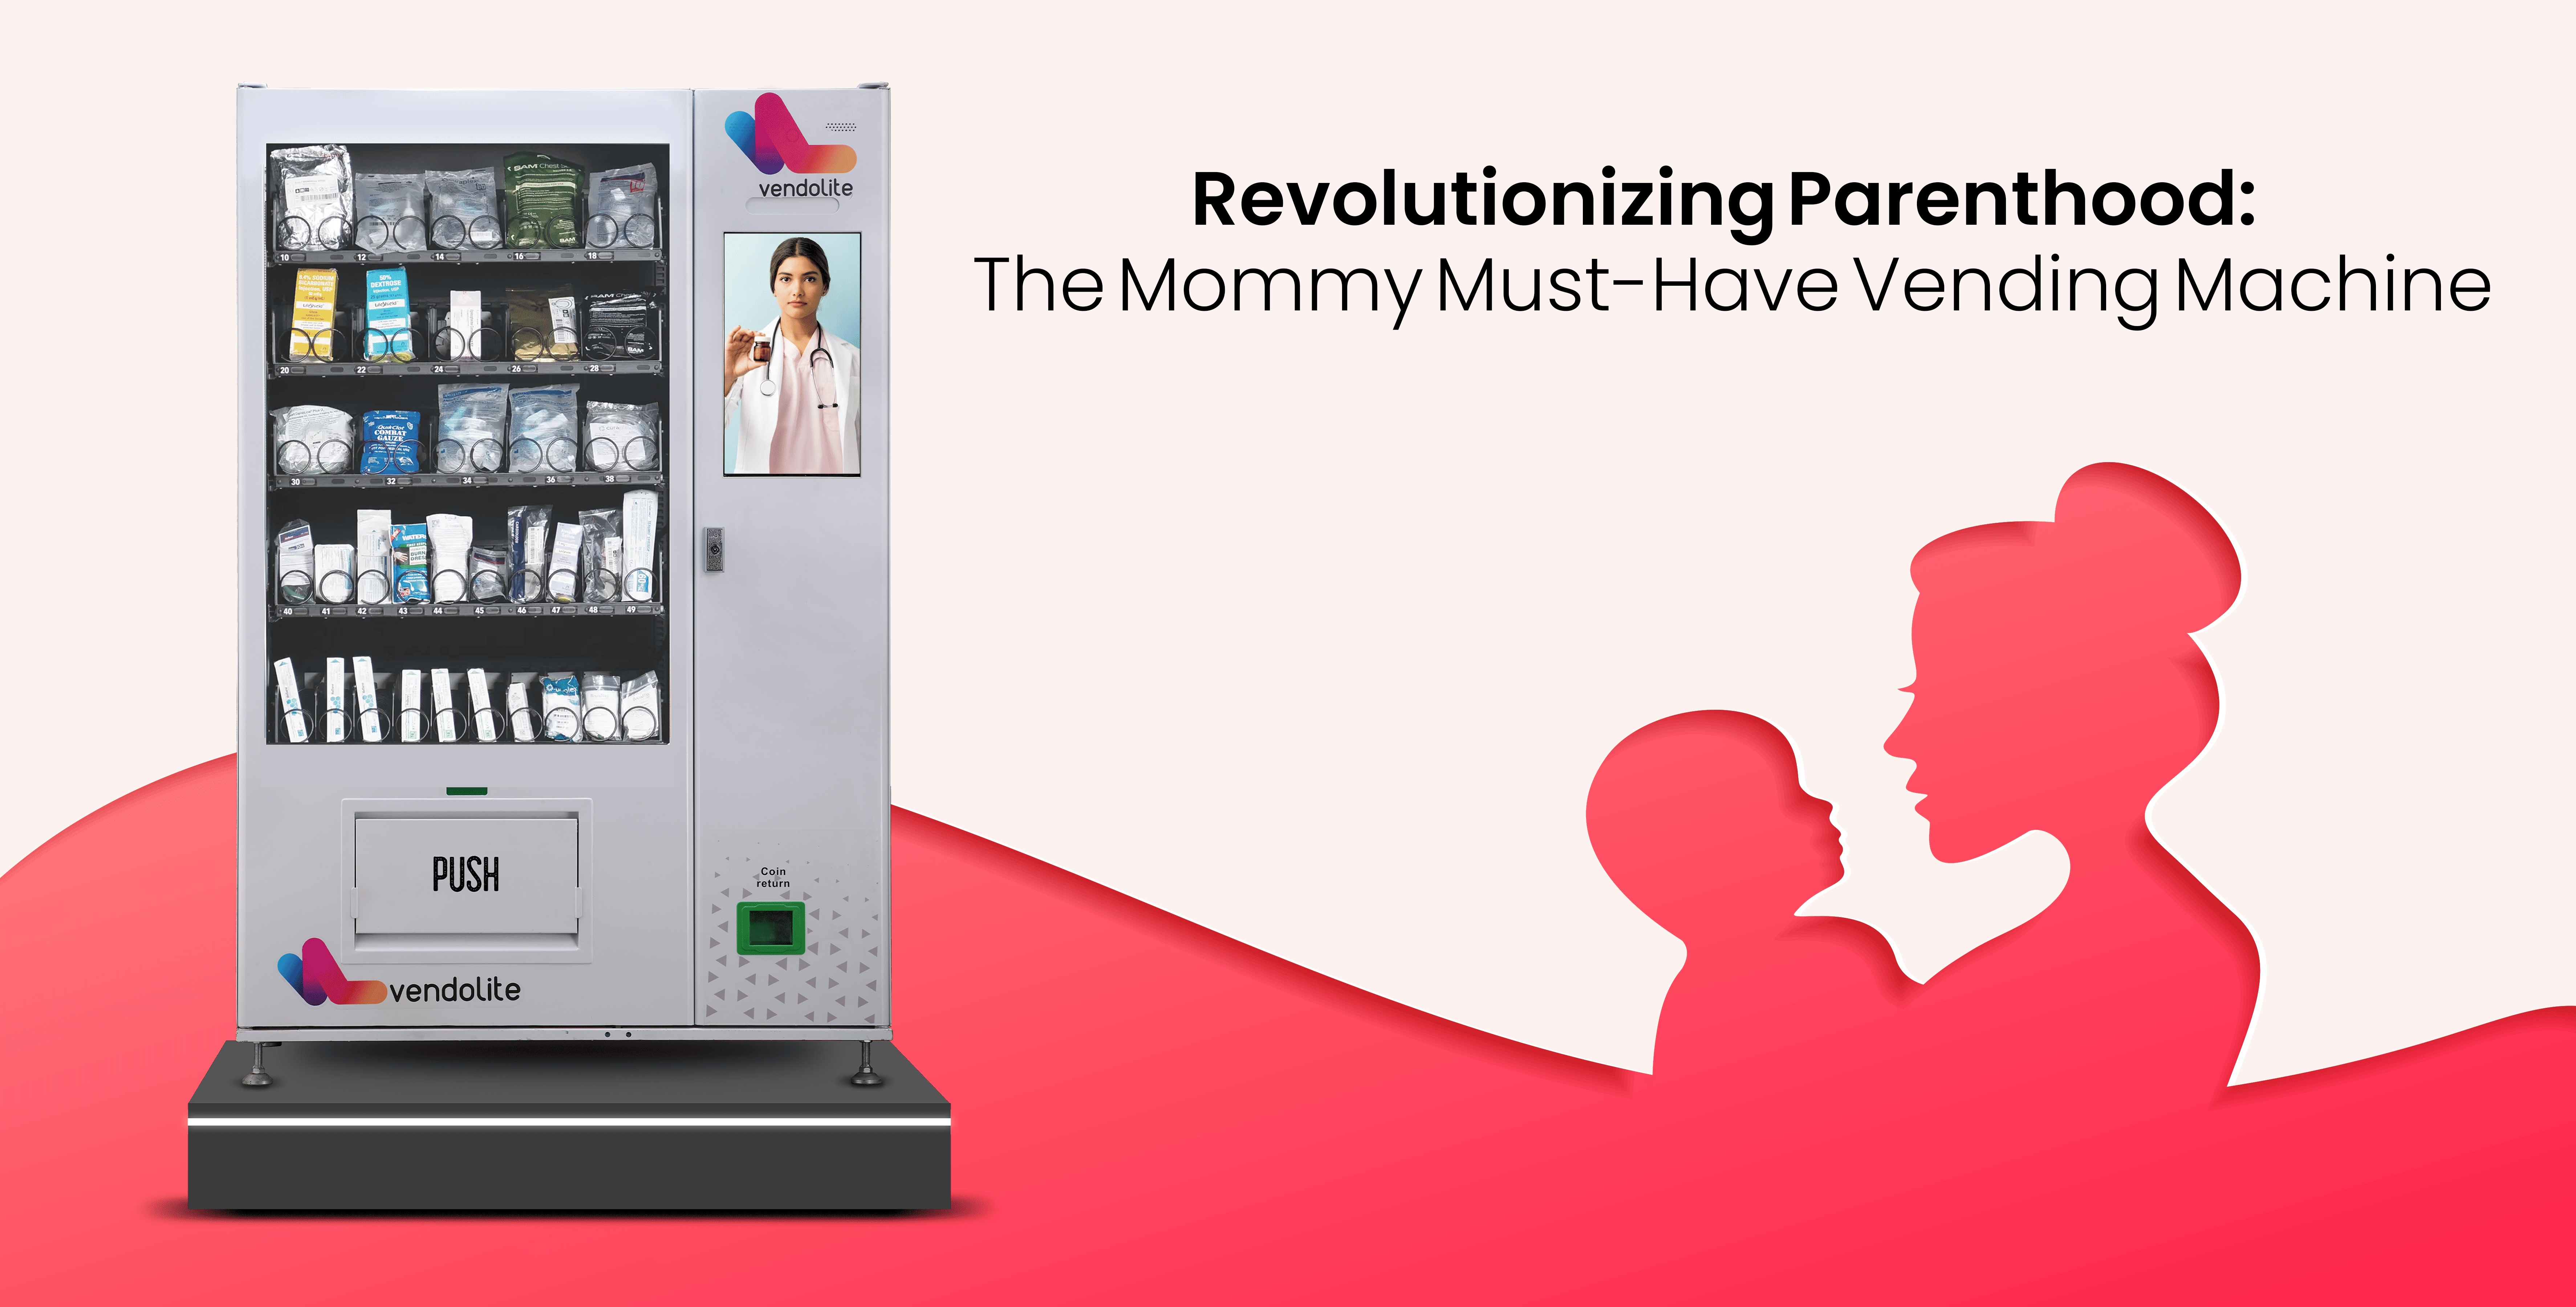 Revolutionizing Parenthood: The Mommy Must-Have Vending Machine